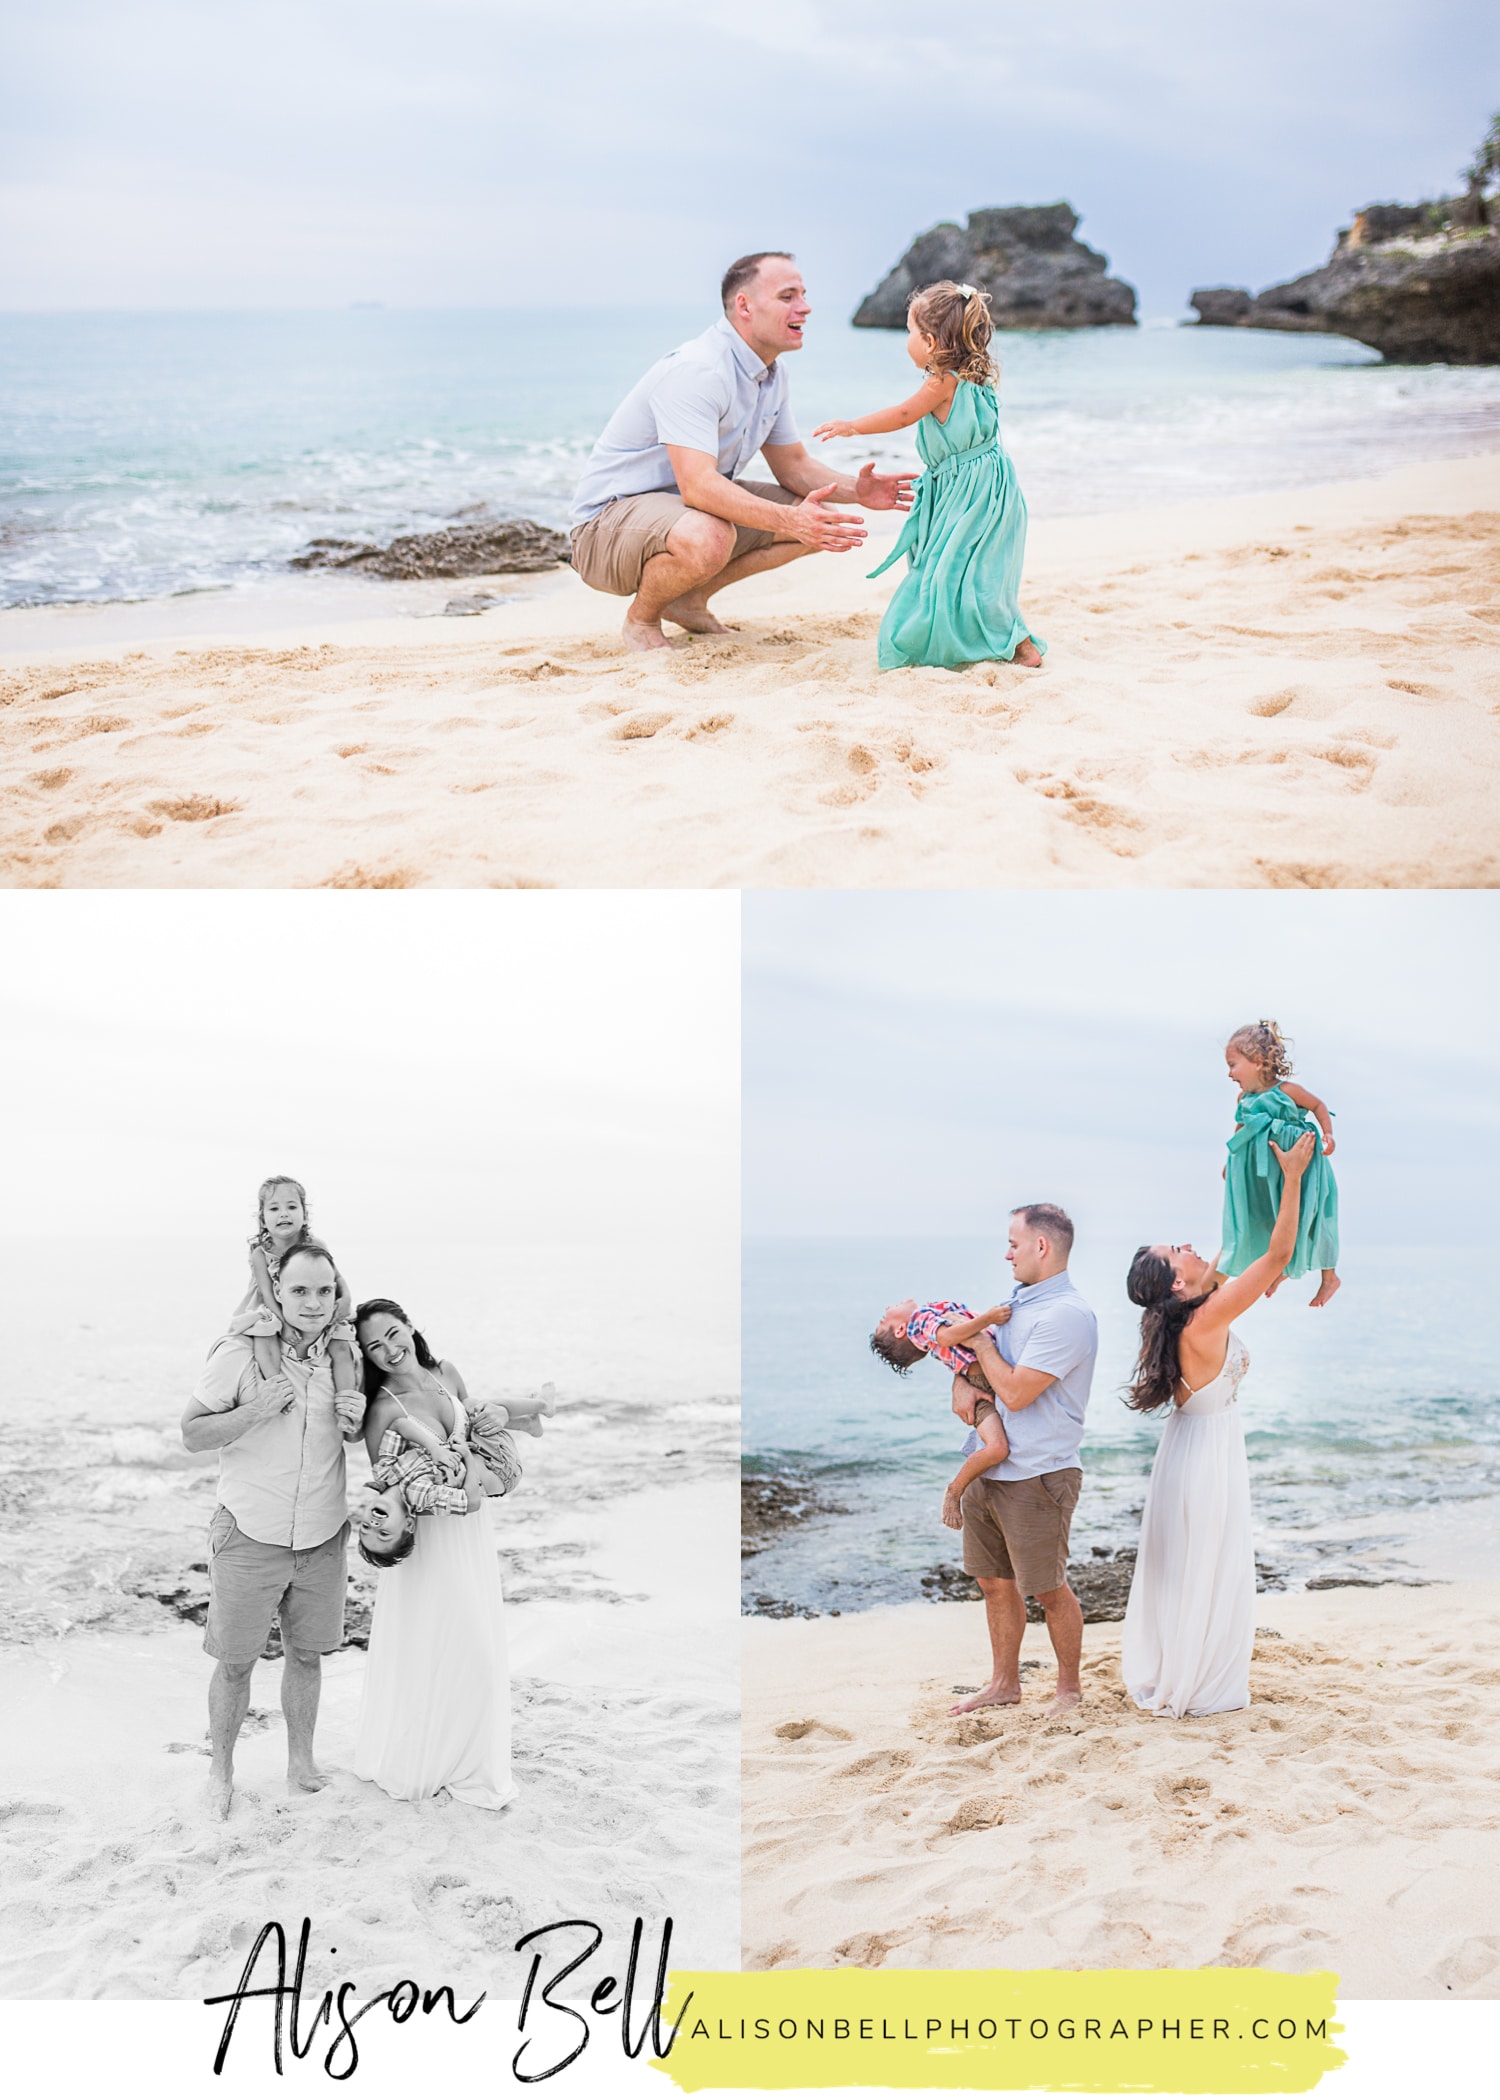 Family of 4, toddler and preschooler, photo session on the beach in Okinawa Japan by Alison Bell Photographer. 